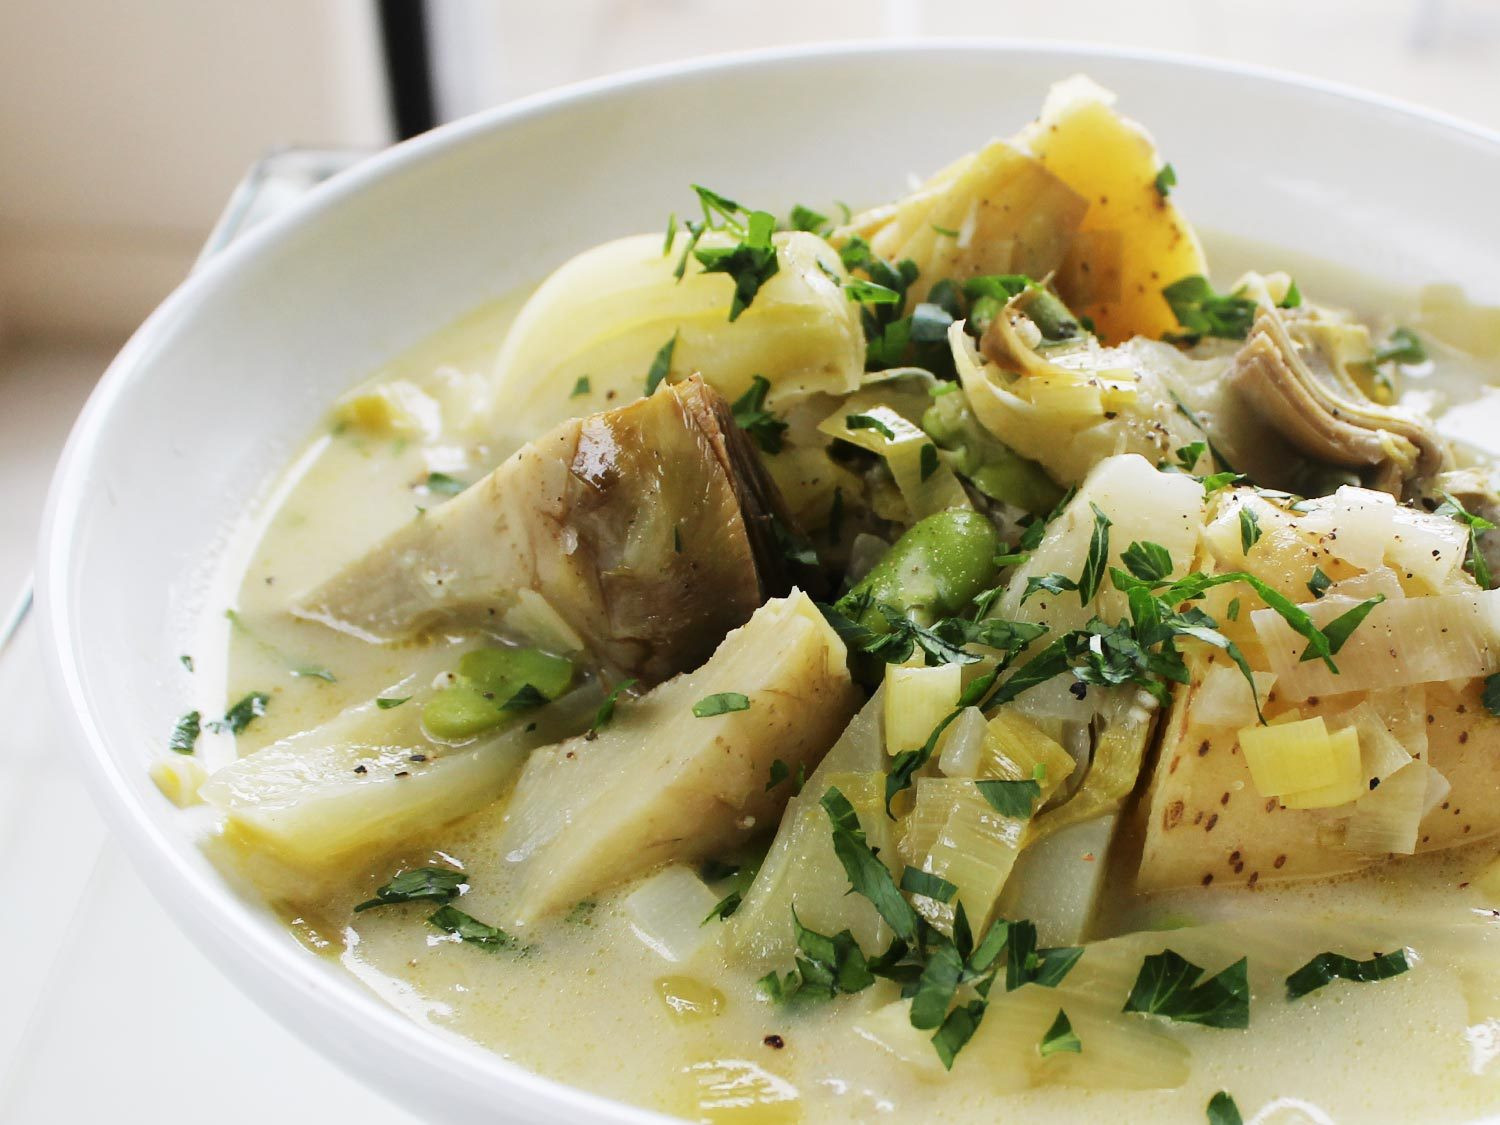 Vegetarian Artichoke Recipes
 Braised Artichokes With Leeks and Peas From The New